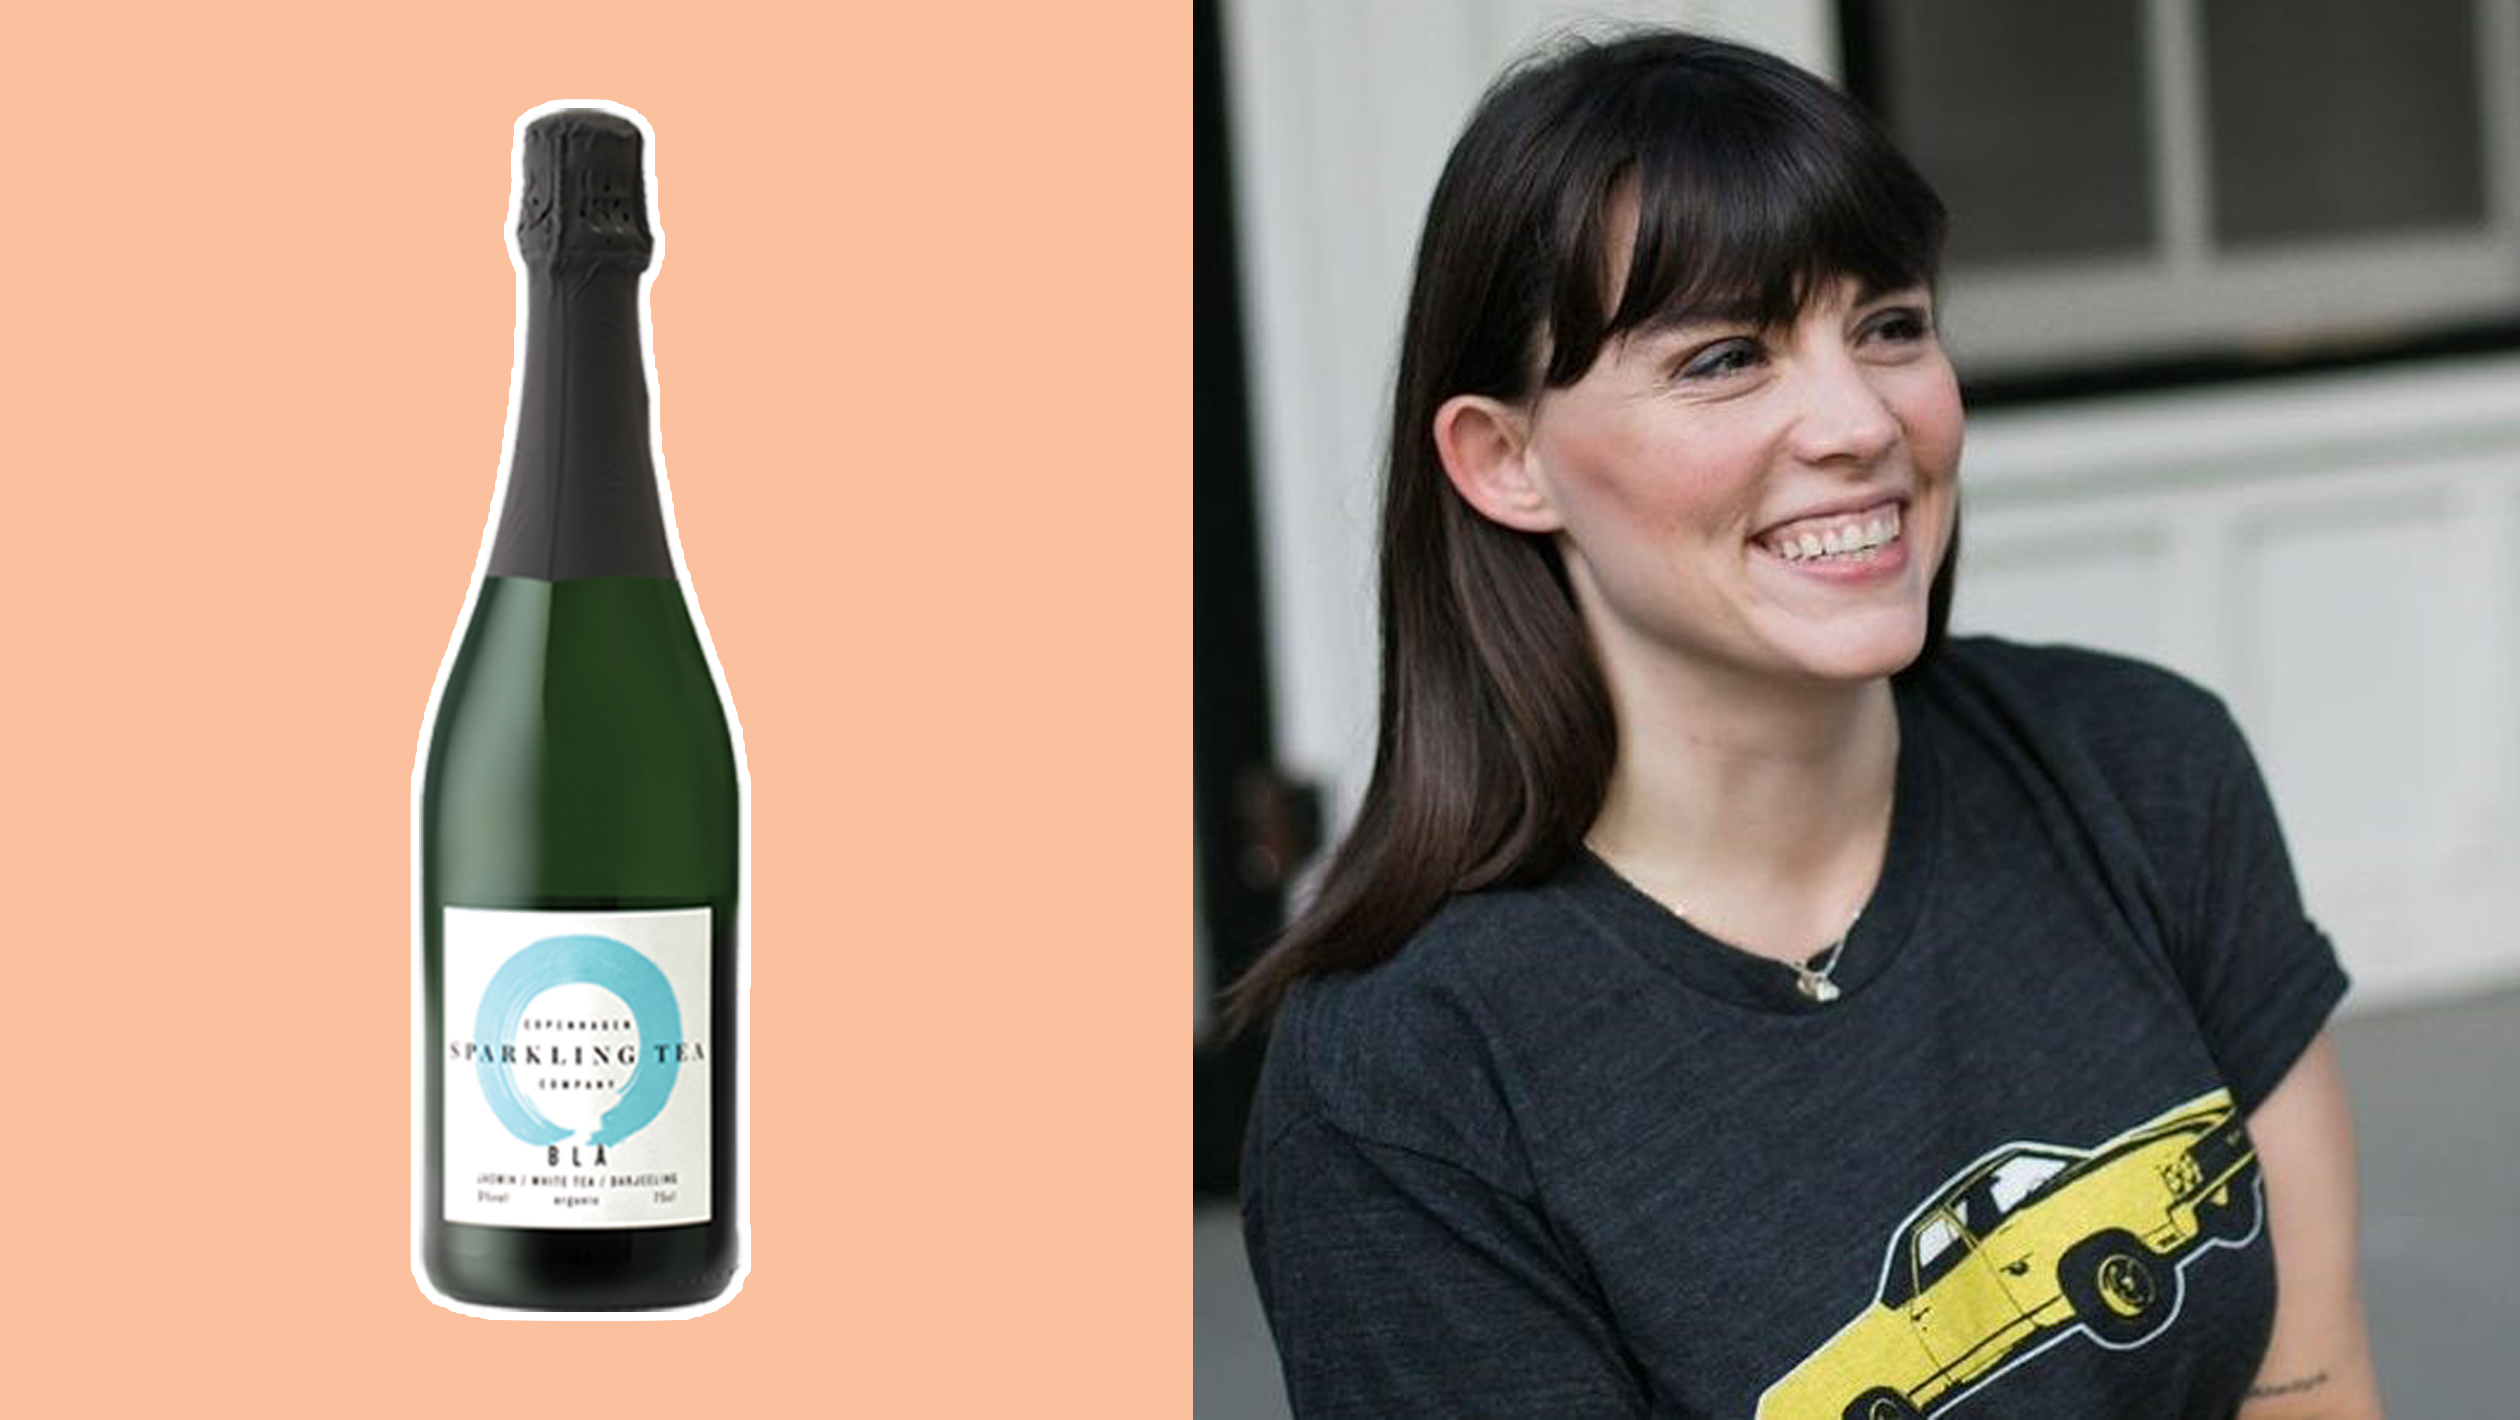 Blå, Copenhagen Sparkling Tea, selected by Grace Vroom, the co-owner of Dear Dry Drinkery. Photo (left) courtesy of Blå; photo credit (right): Caitlin Rounds.